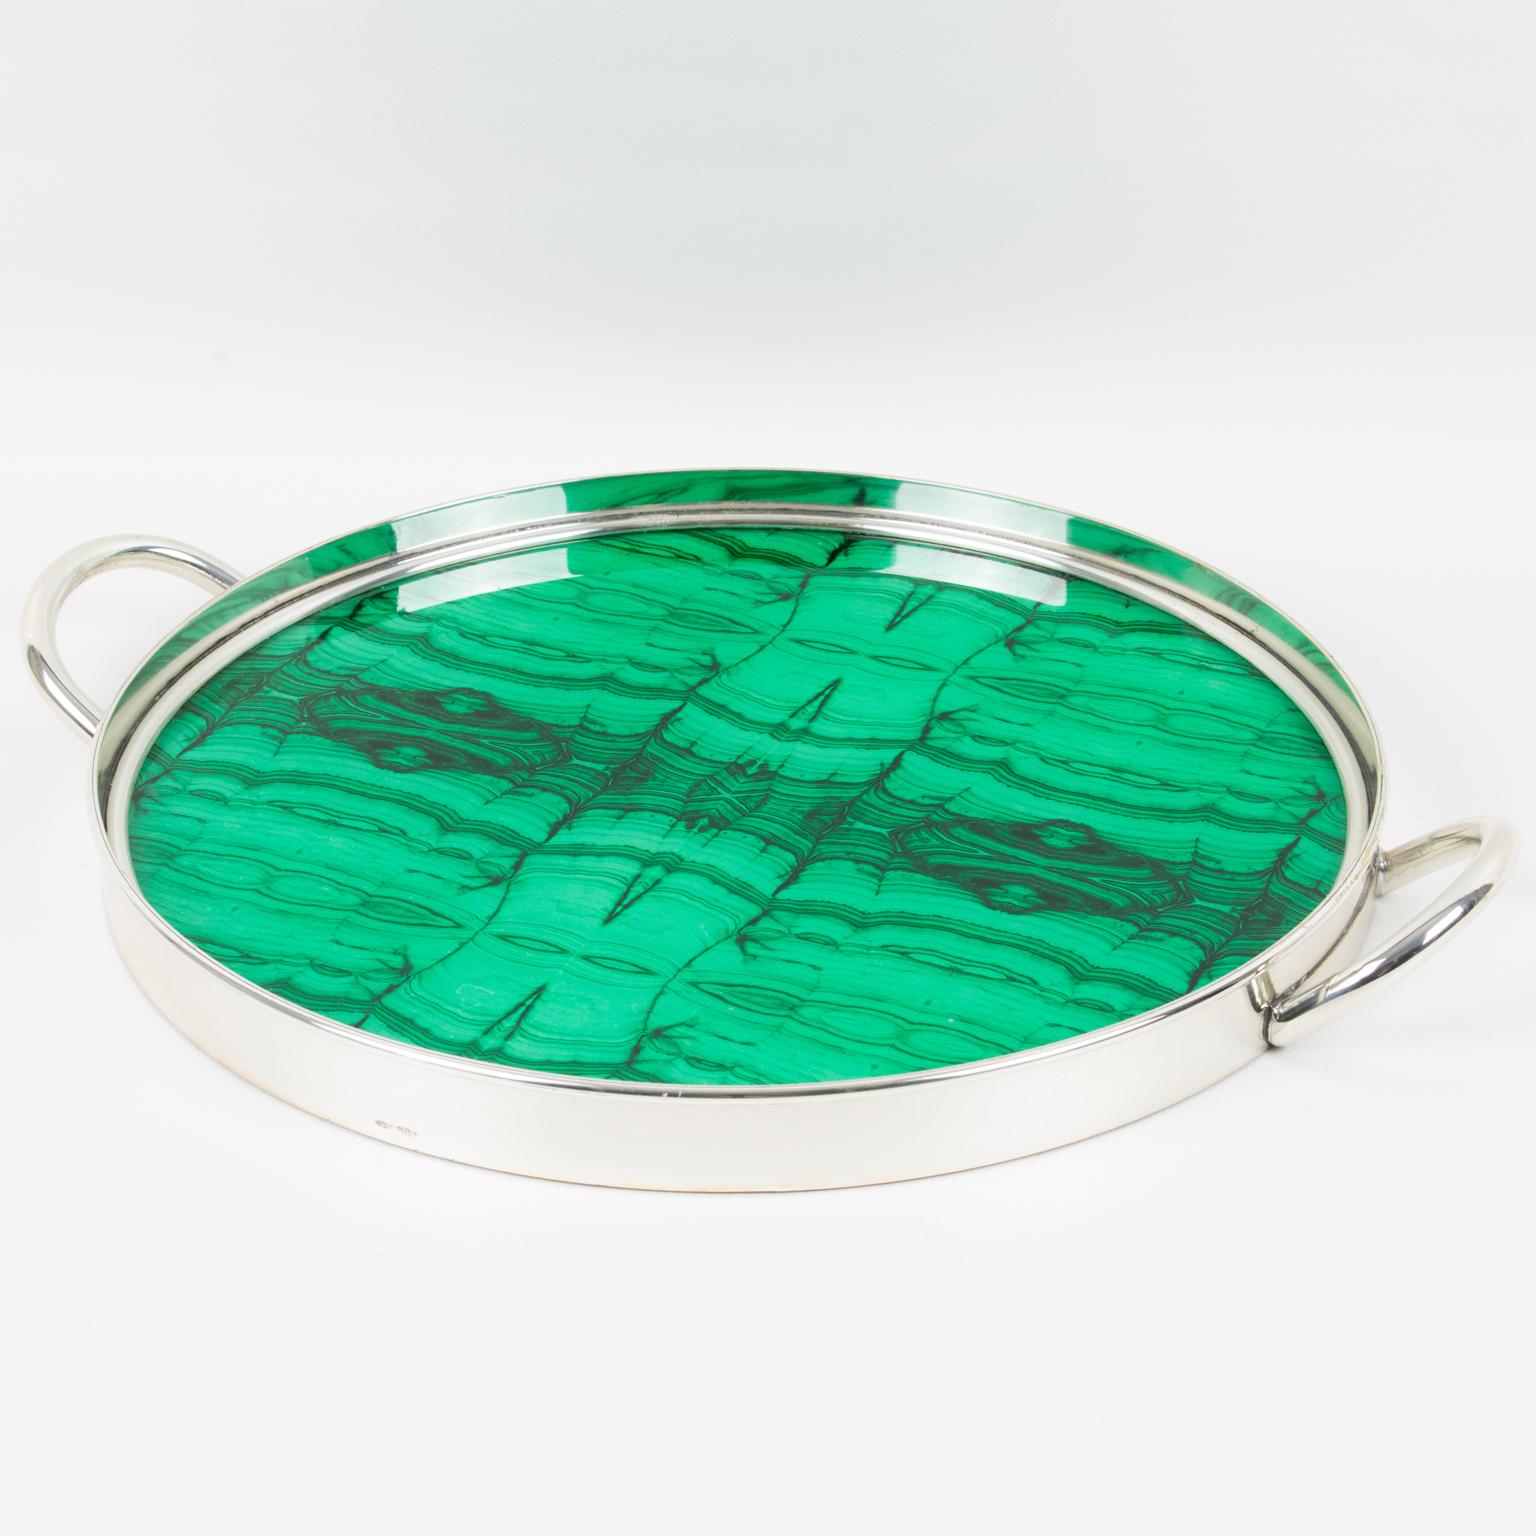 This elegant Italian barware serving tray boasts a rounded silverplate frame (gallery and handles) with a glass insert featuring a malachite-like reversed painted textured pattern. The tray is marked on the side: 